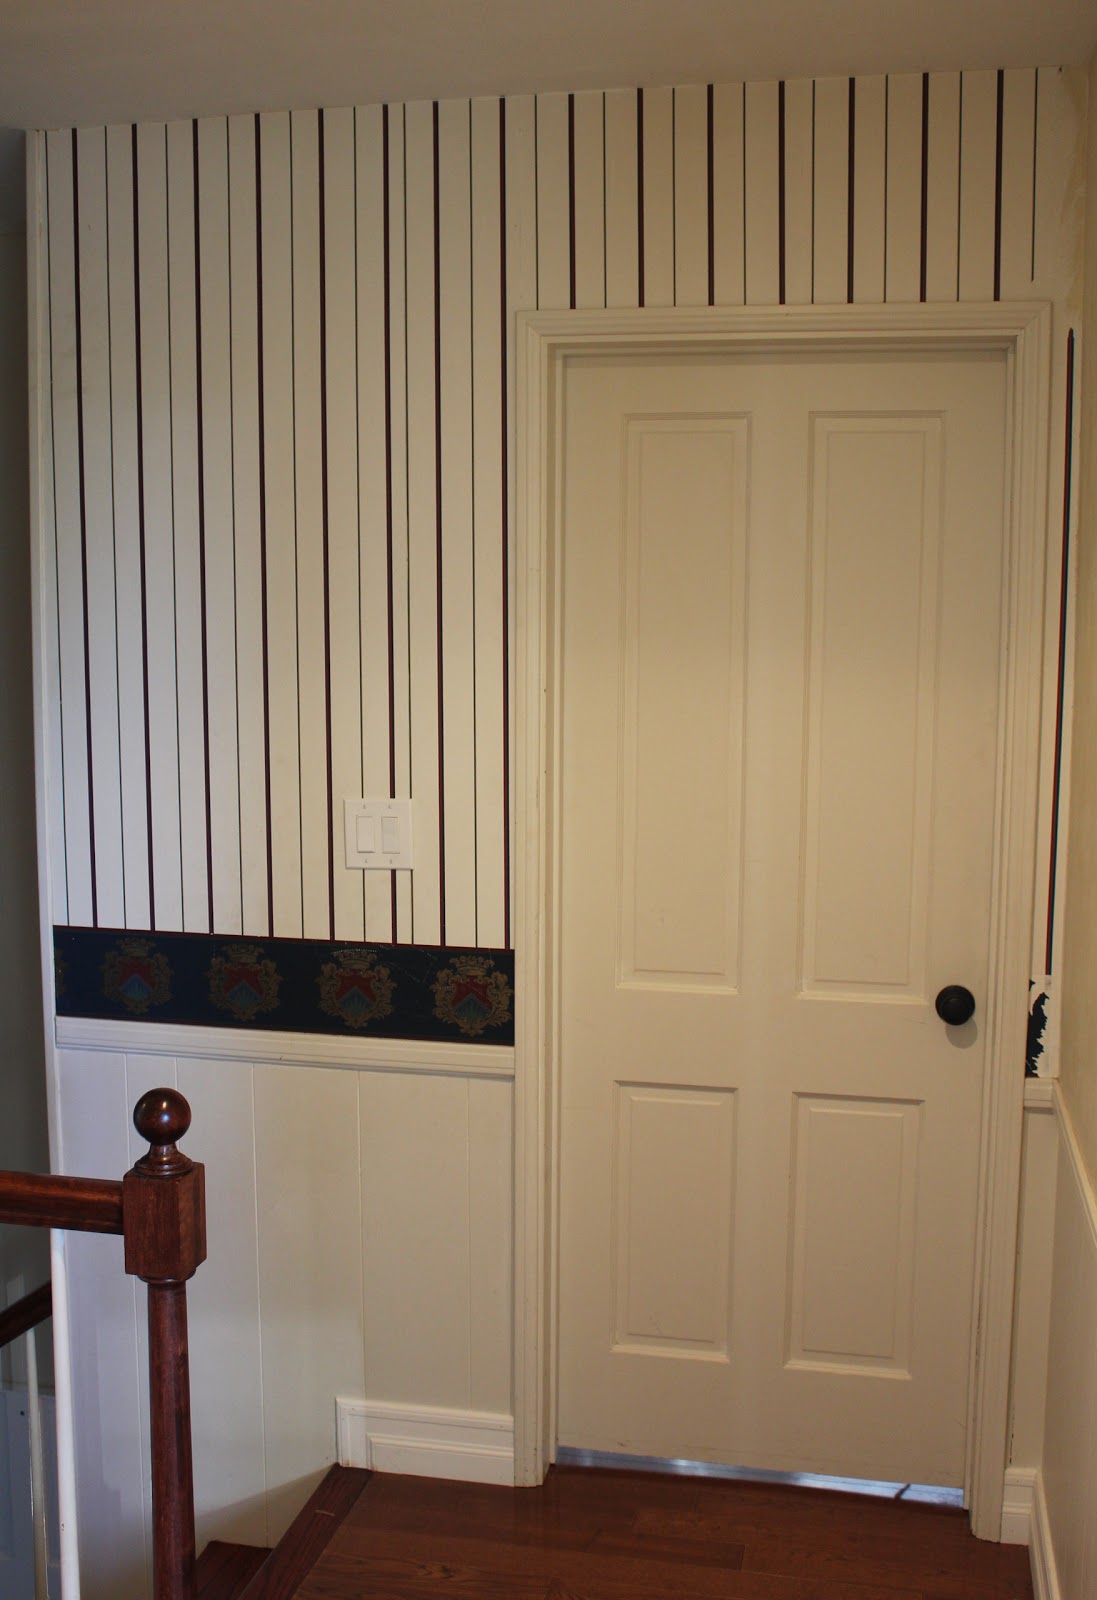 Wainscoting Panels Wallpaper Over And